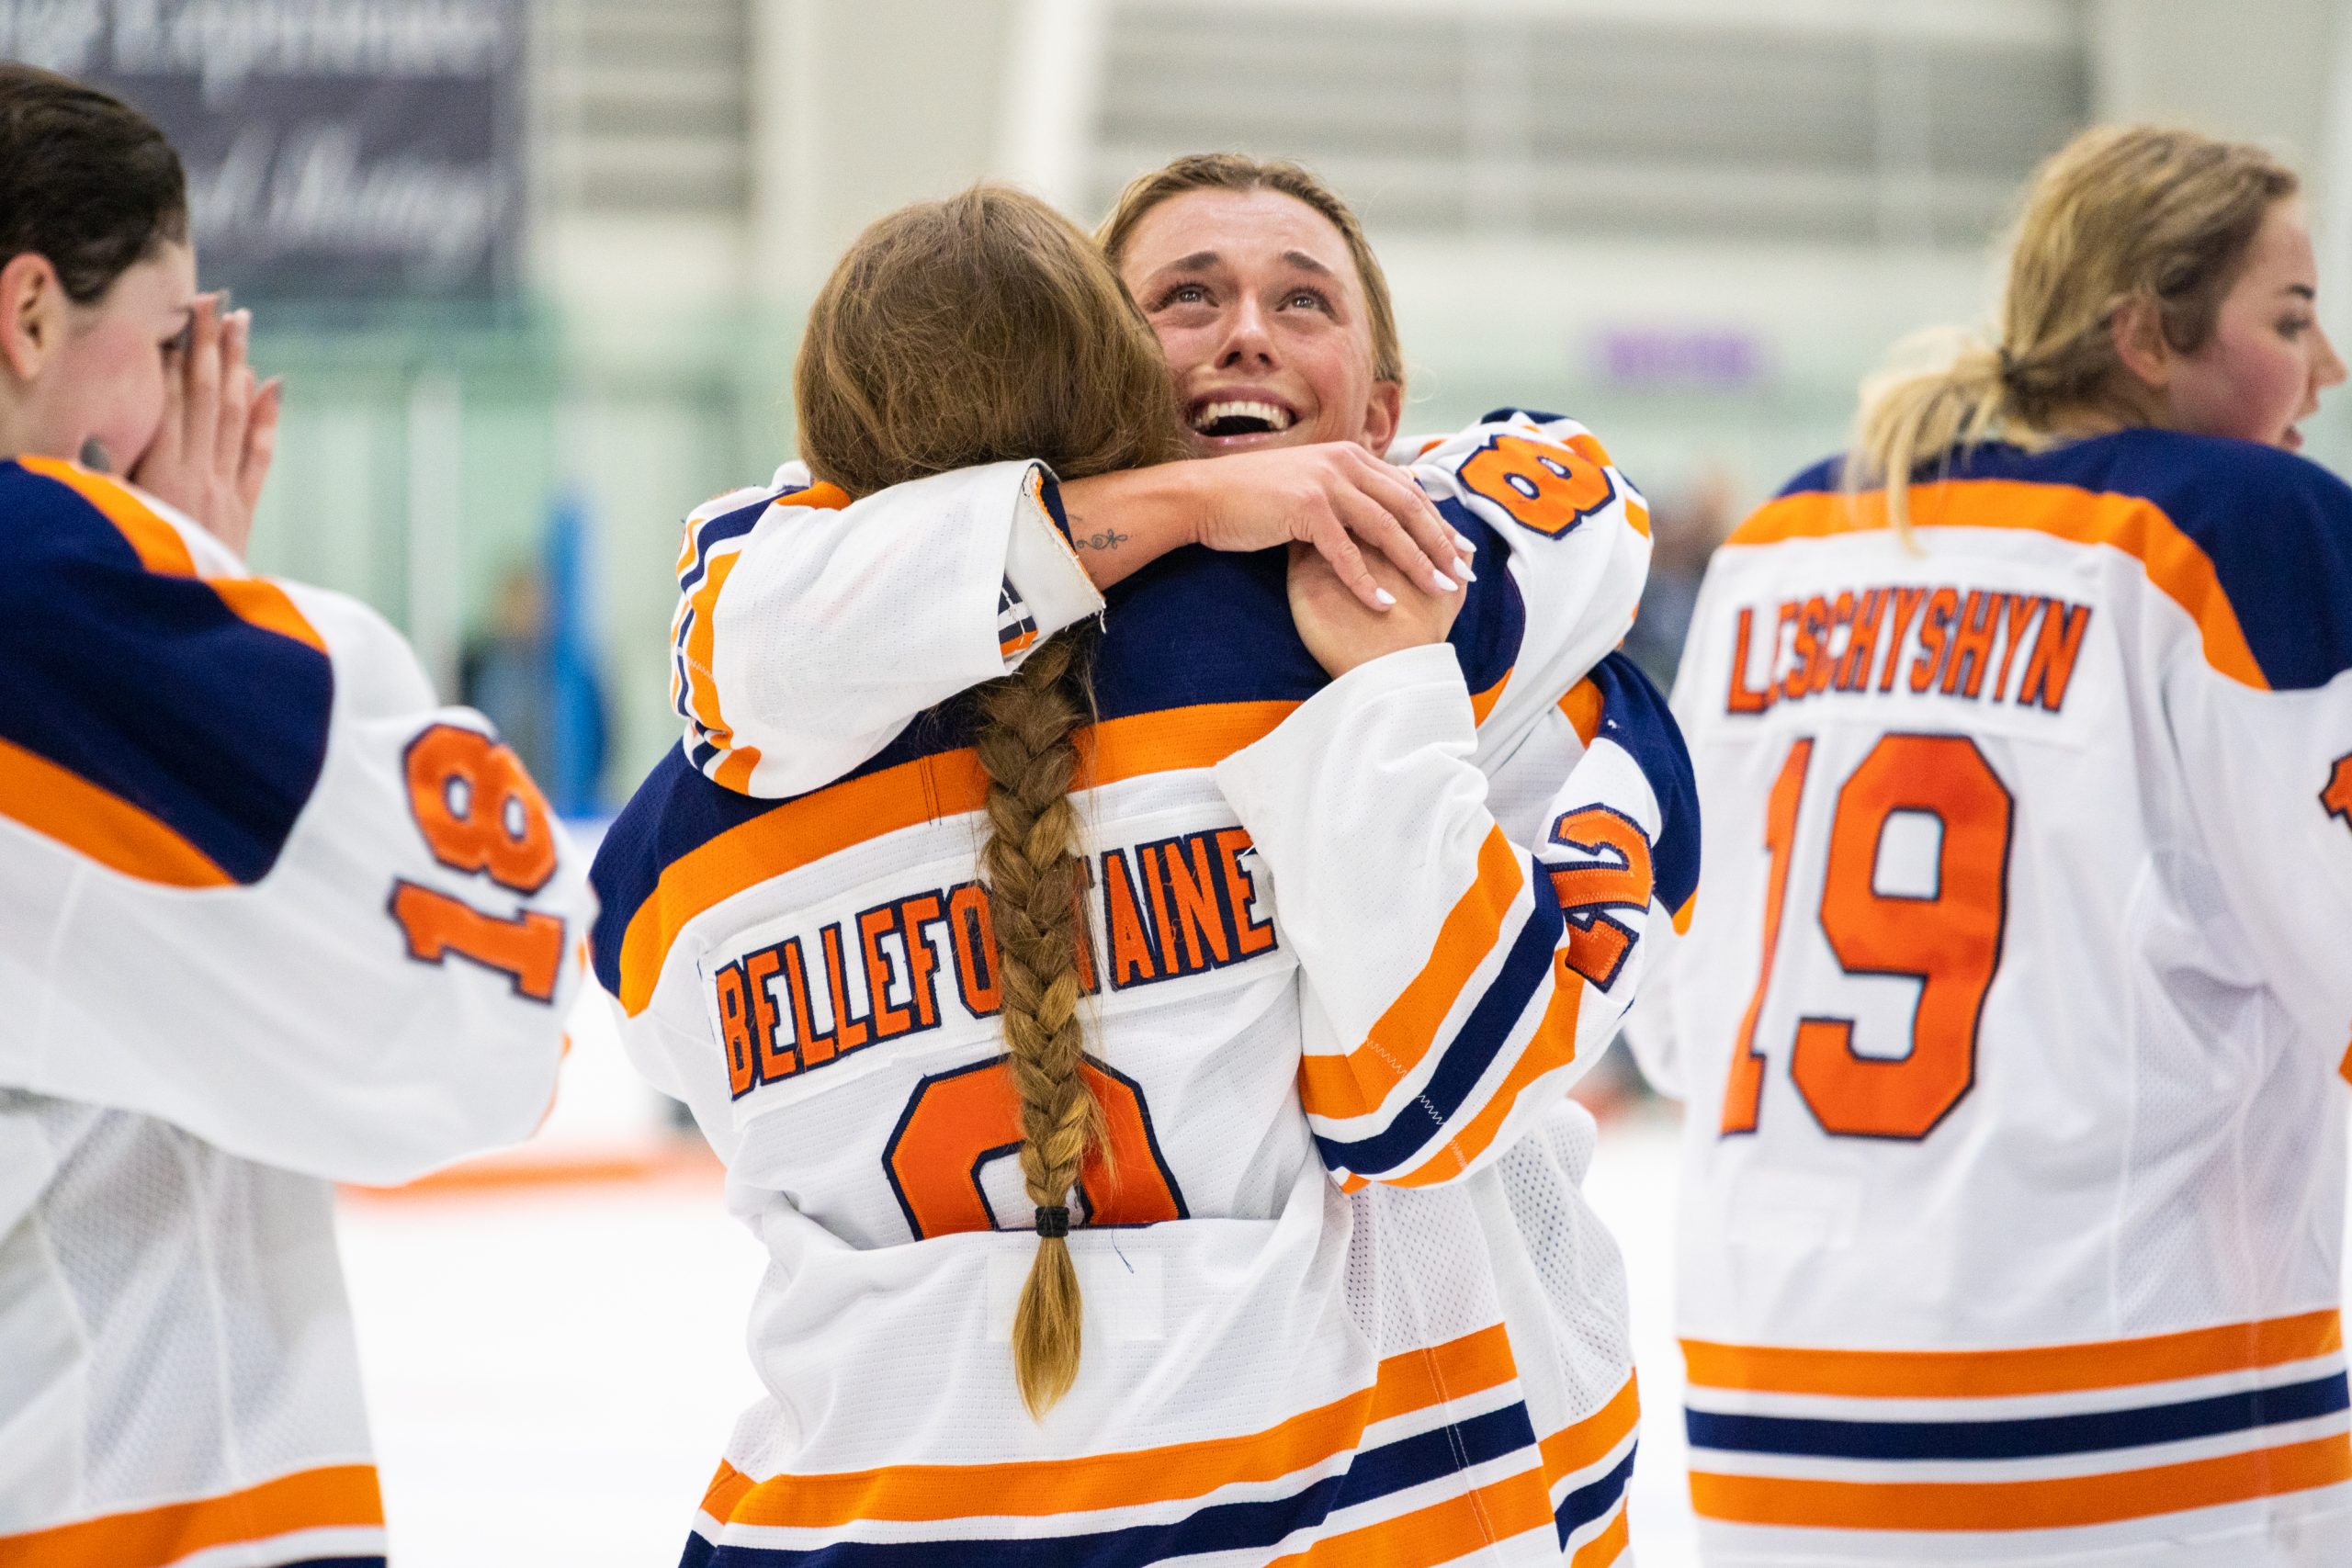 Syracuse senior Lauren Bellefontaine and graduate student Victoria Klimek hold back tears as they hug each other after winning the CHA championship in overtime.